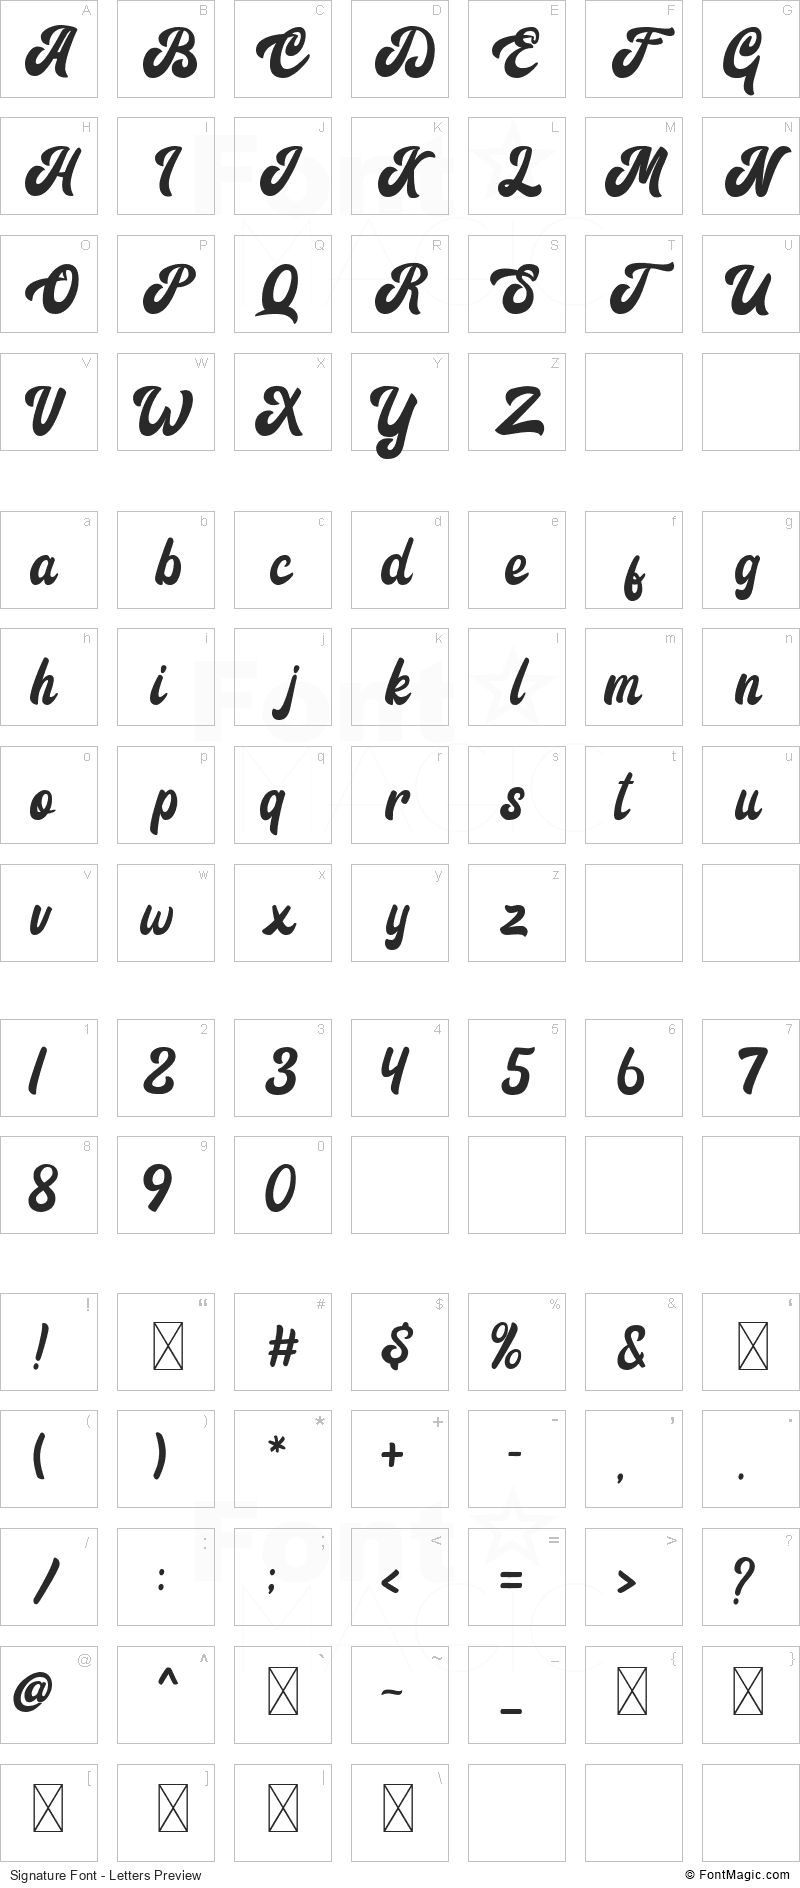 Signature Font - All Latters Preview Chart